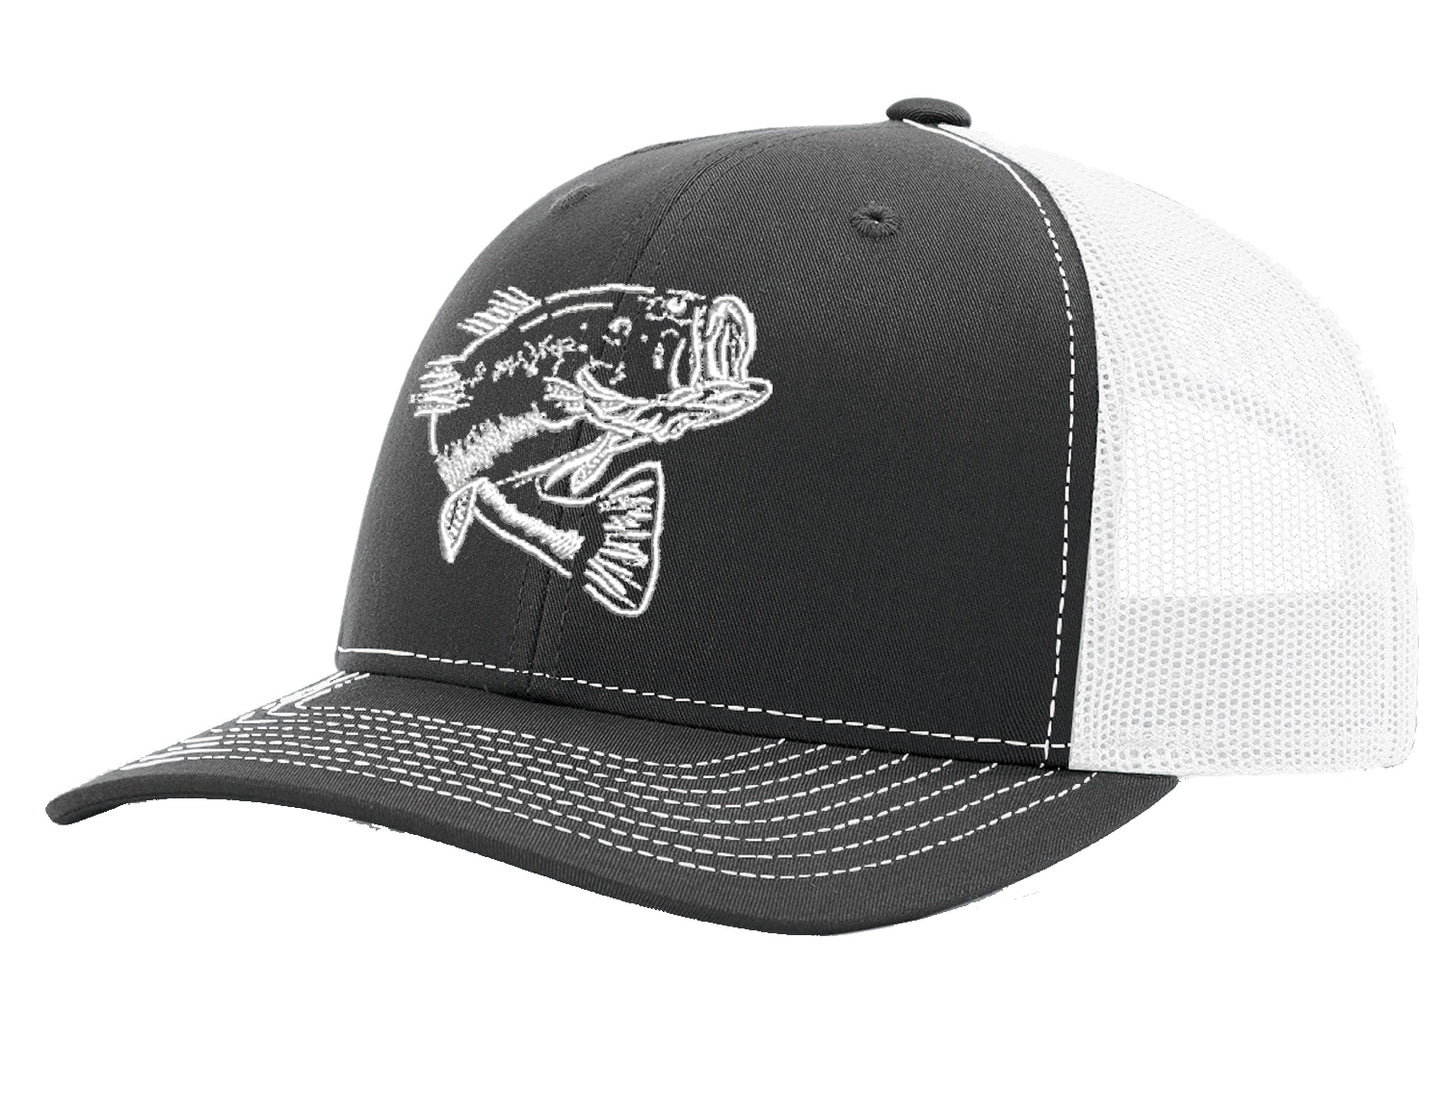 New Bass "Reel Hawg" Structured Trucker Hat - Charcoal/White - White Bass logo